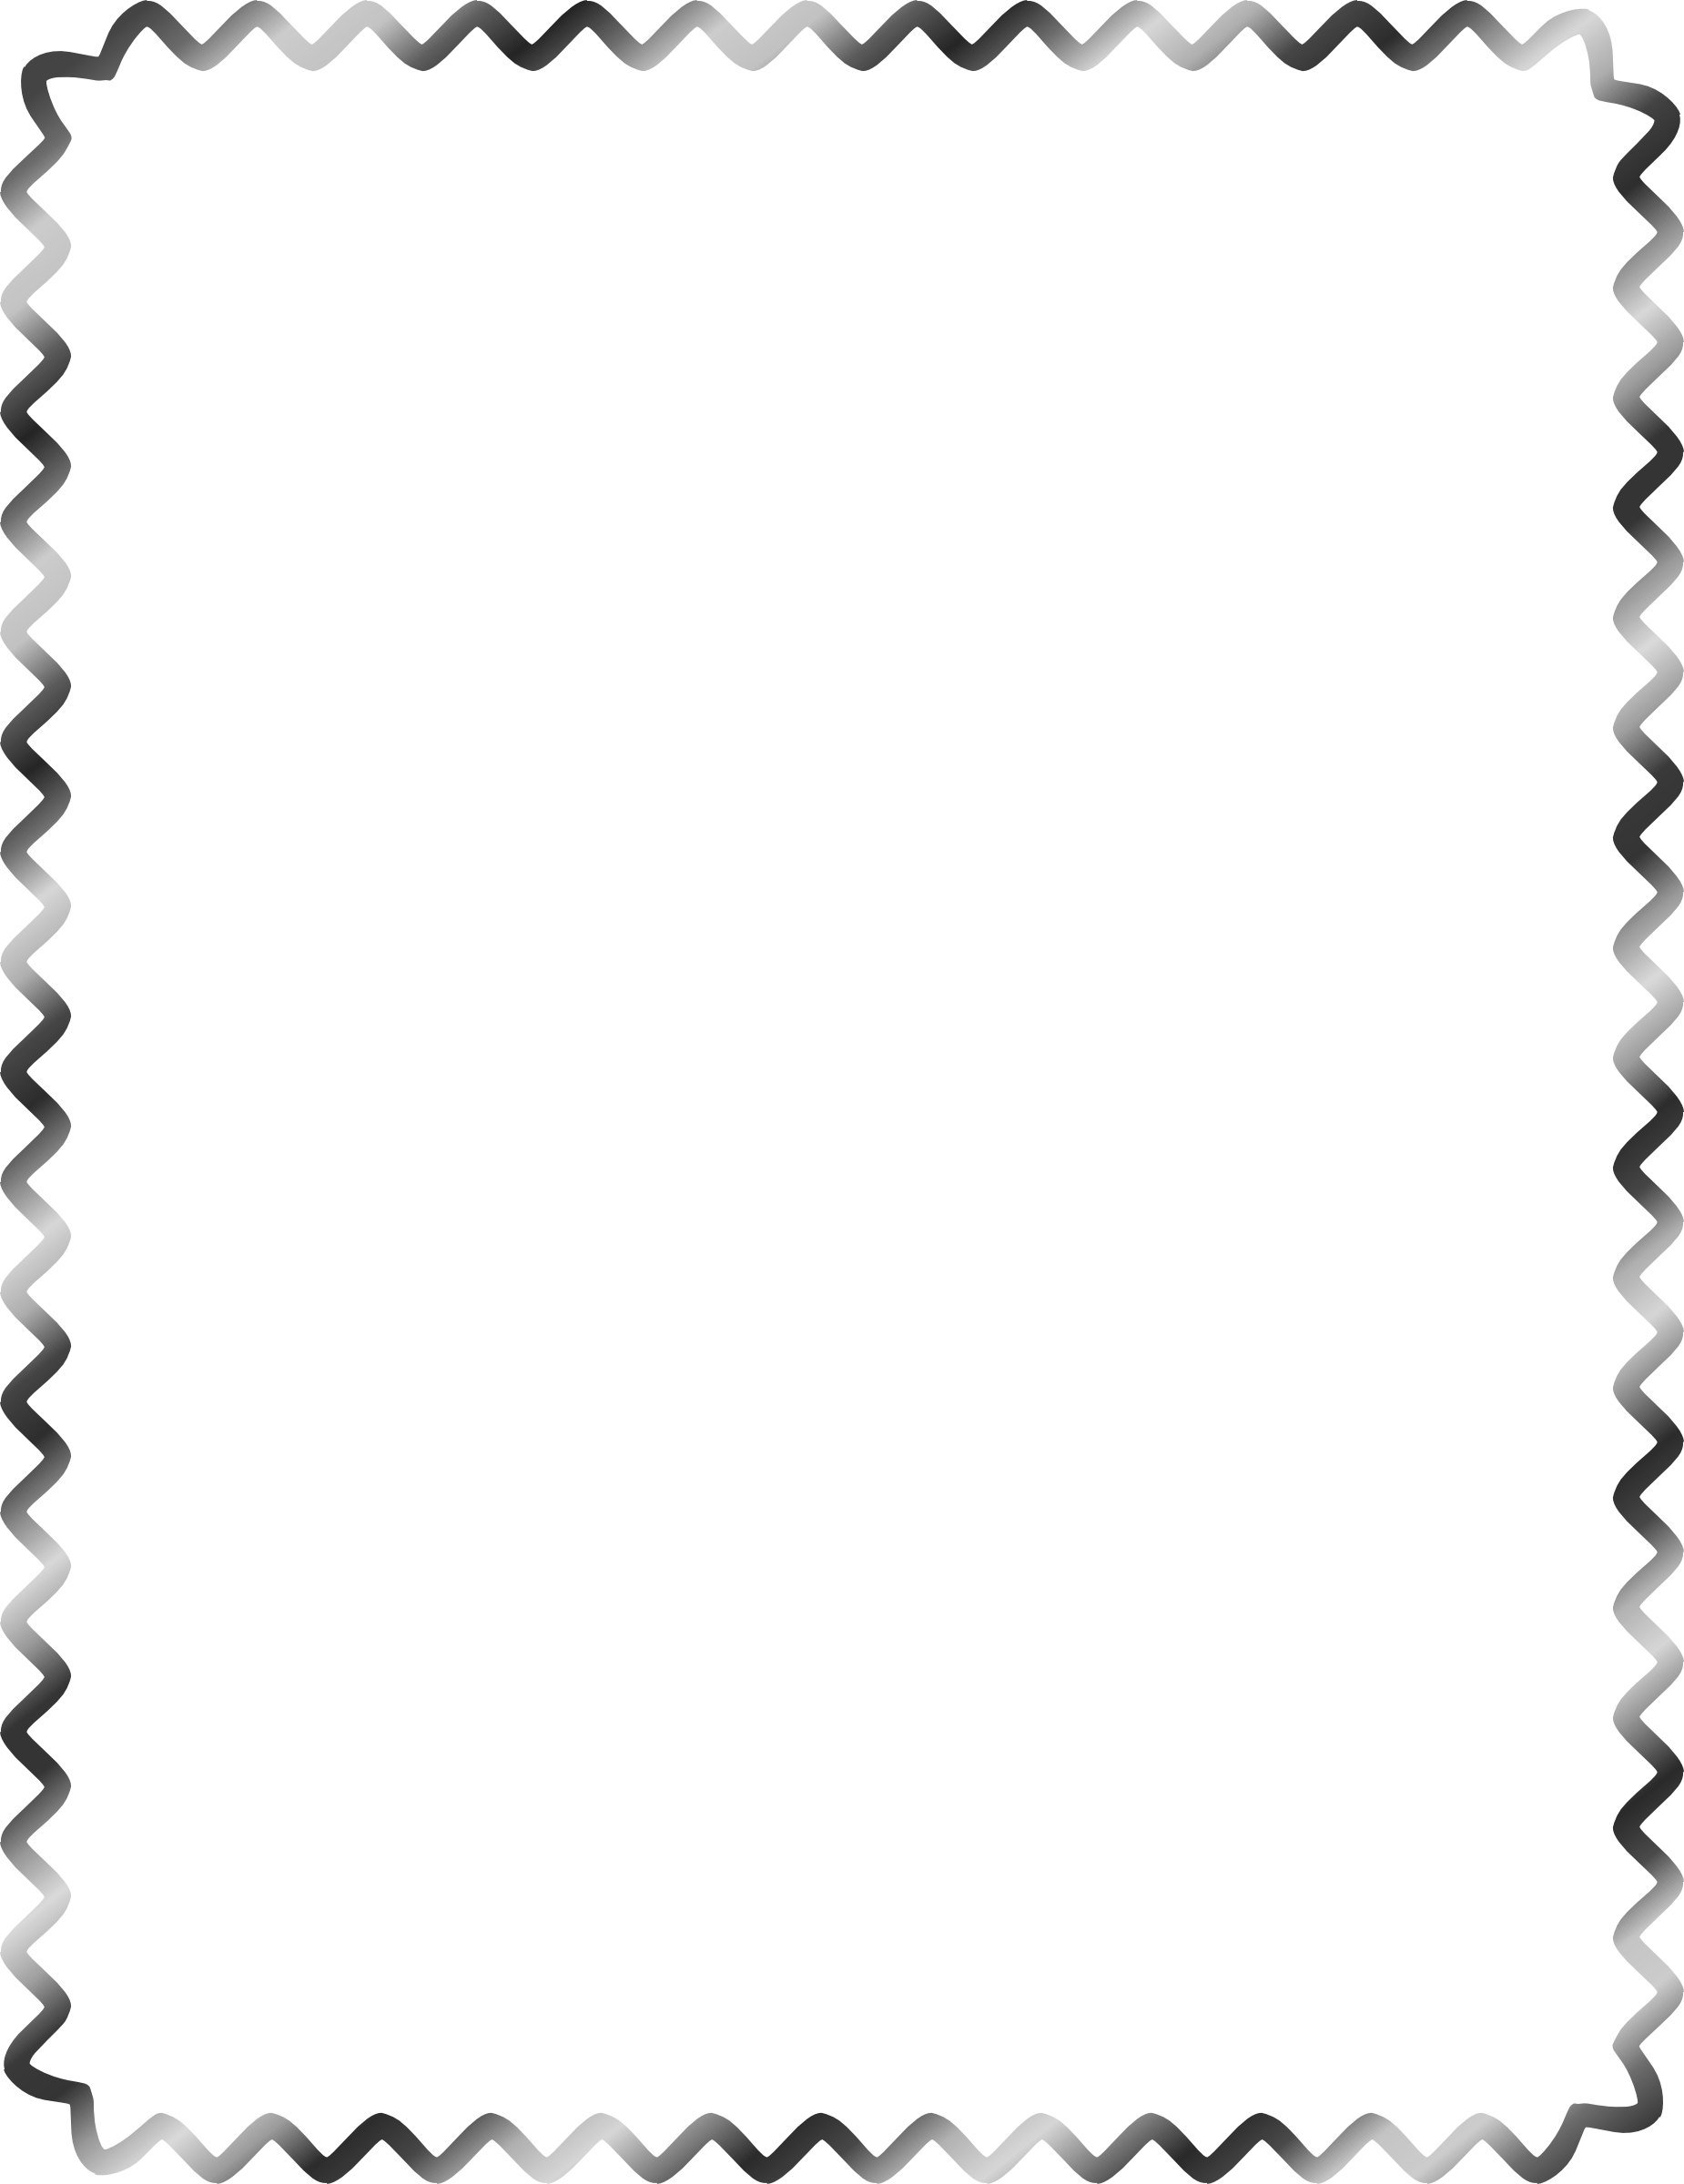 Waves black and white cartoon wave border free cliparts that